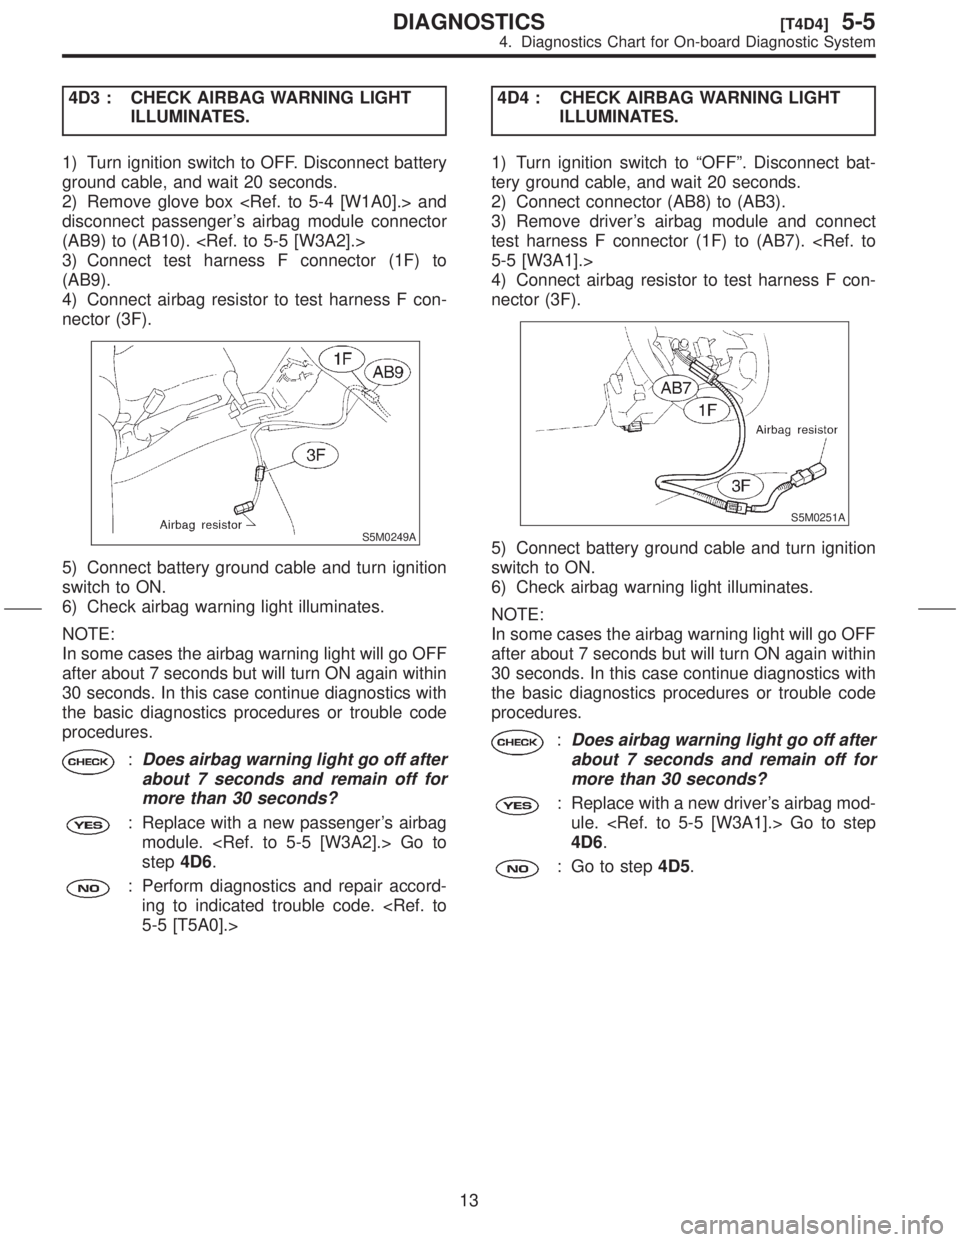 SUBARU FORESTER 1999  Service Repair Manual 4D3 : CHECK AIRBAG WARNING LIGHT
ILLUMINATES.
1) Turn ignition switch to OFF. Disconnect battery
ground cable, and wait 20 seconds.
2) Remove glove box <Ref. to 5-4 [W1A0].> and
disconnect passengers